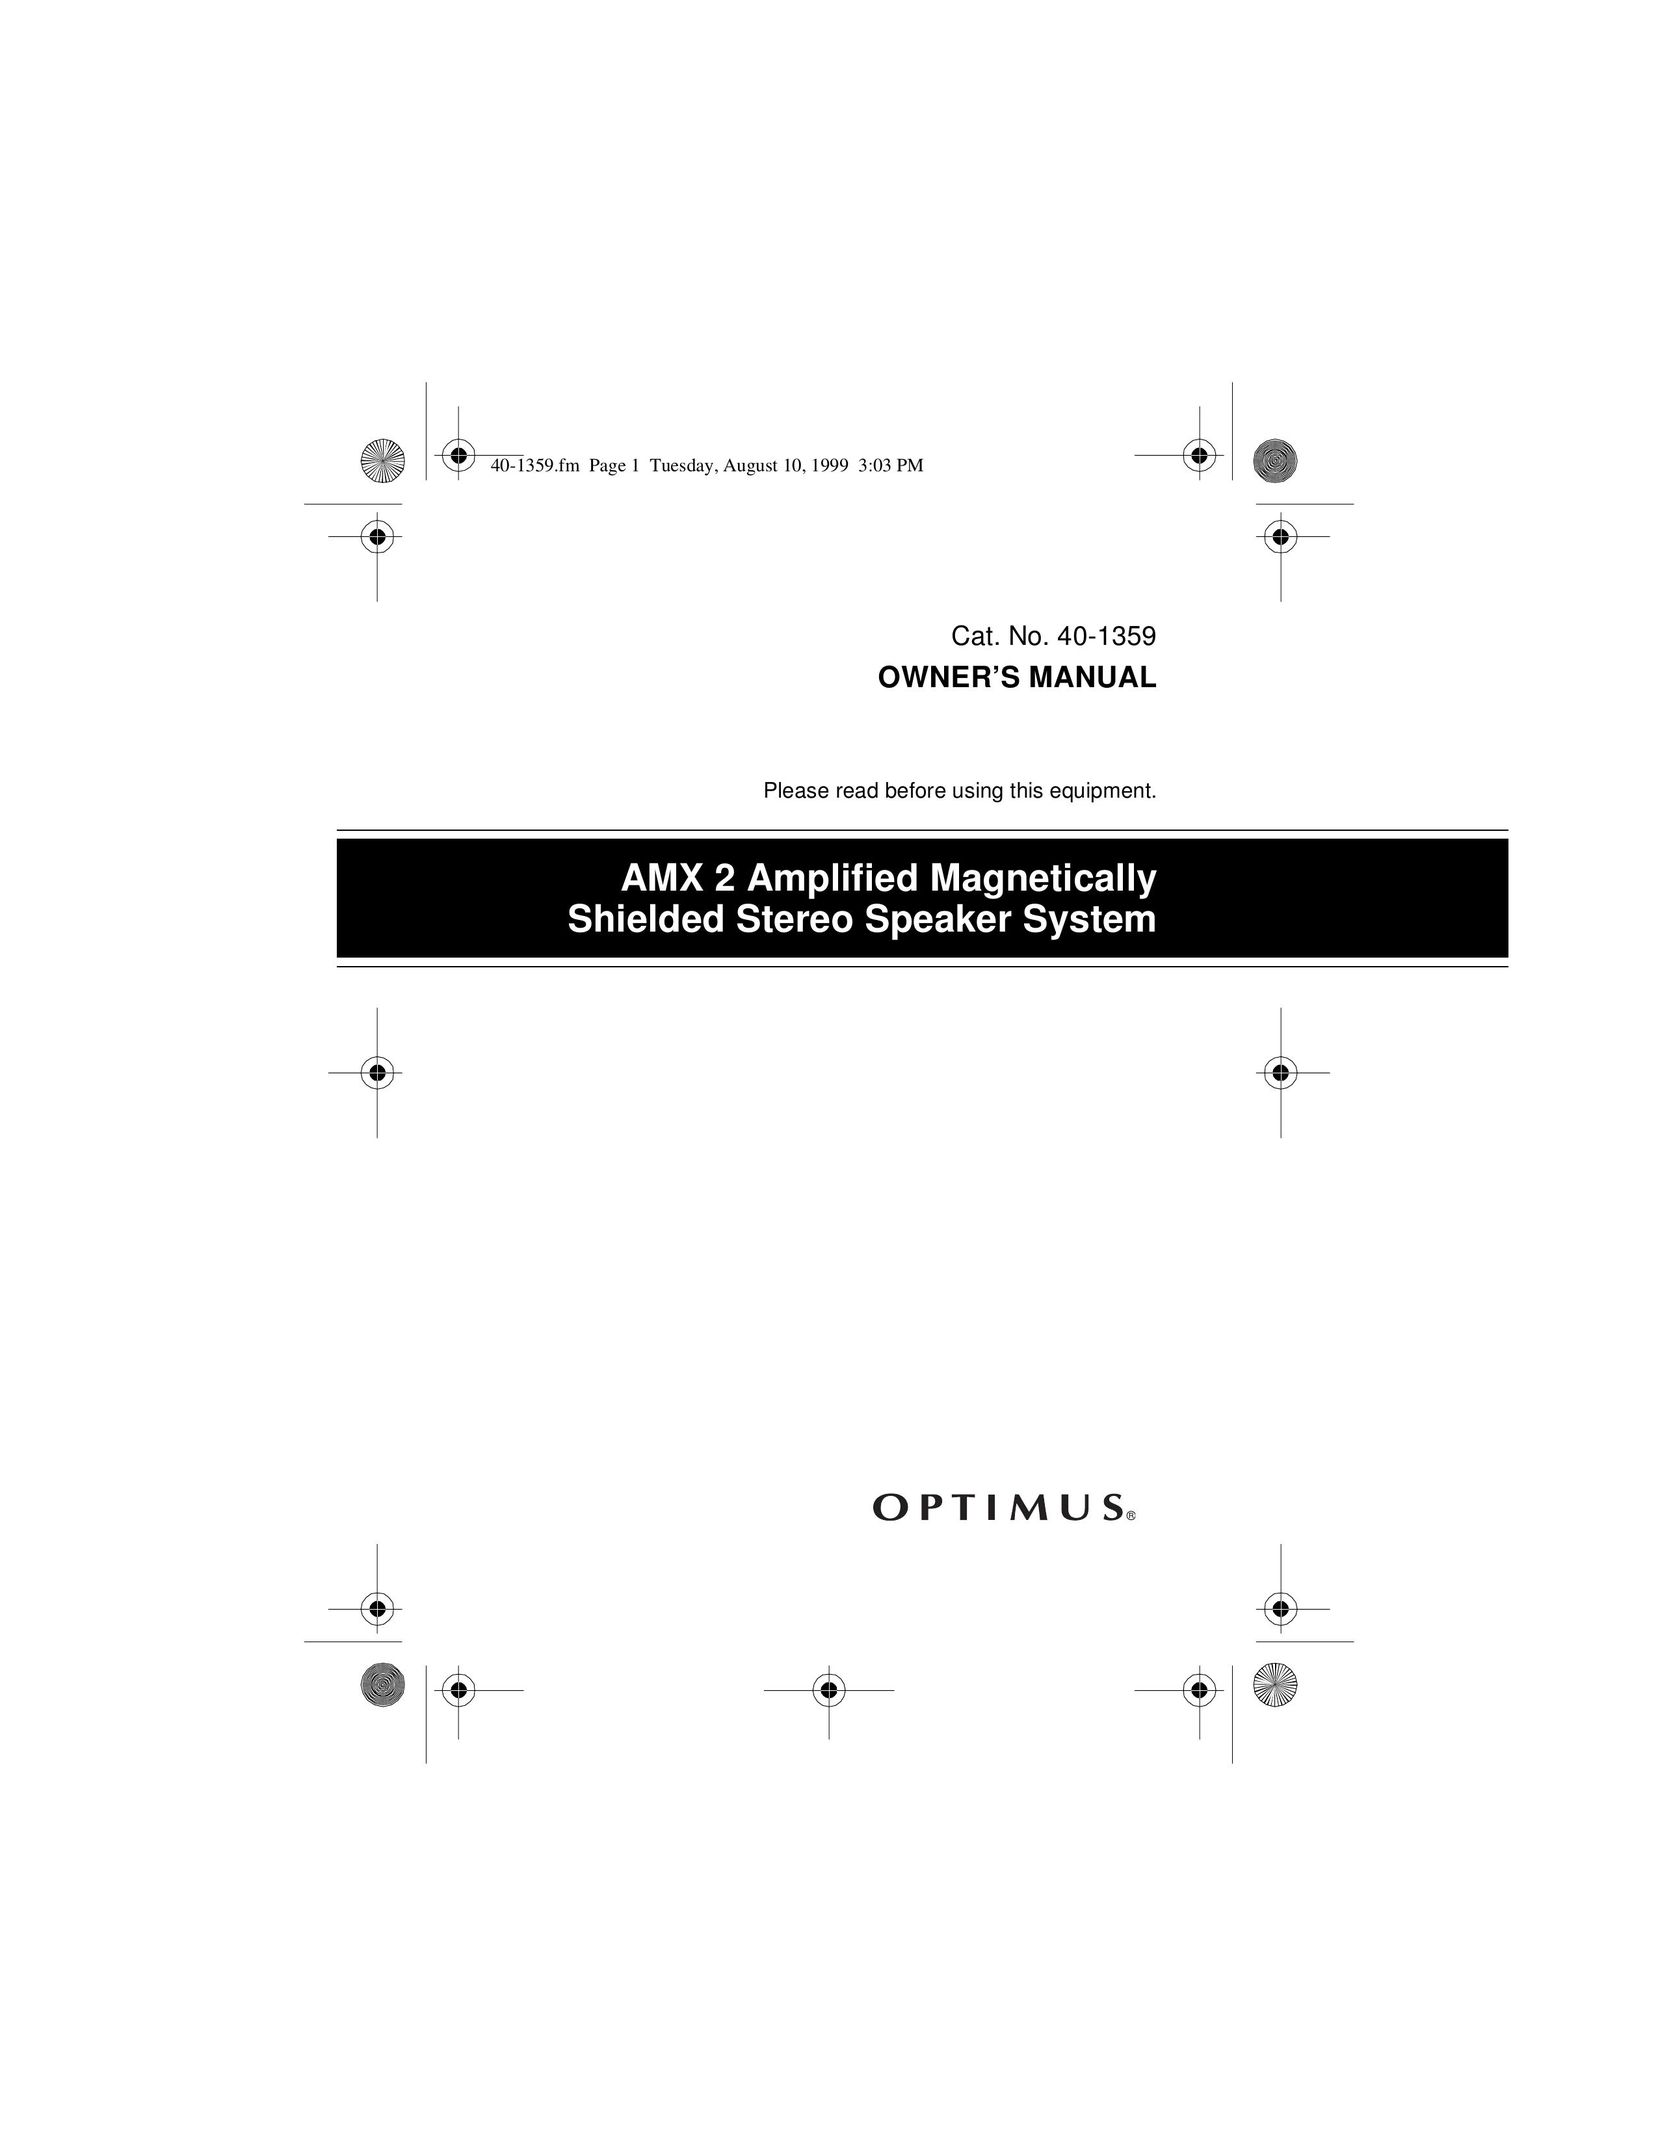 Optimus 40-1359 Home Theater System User Manual